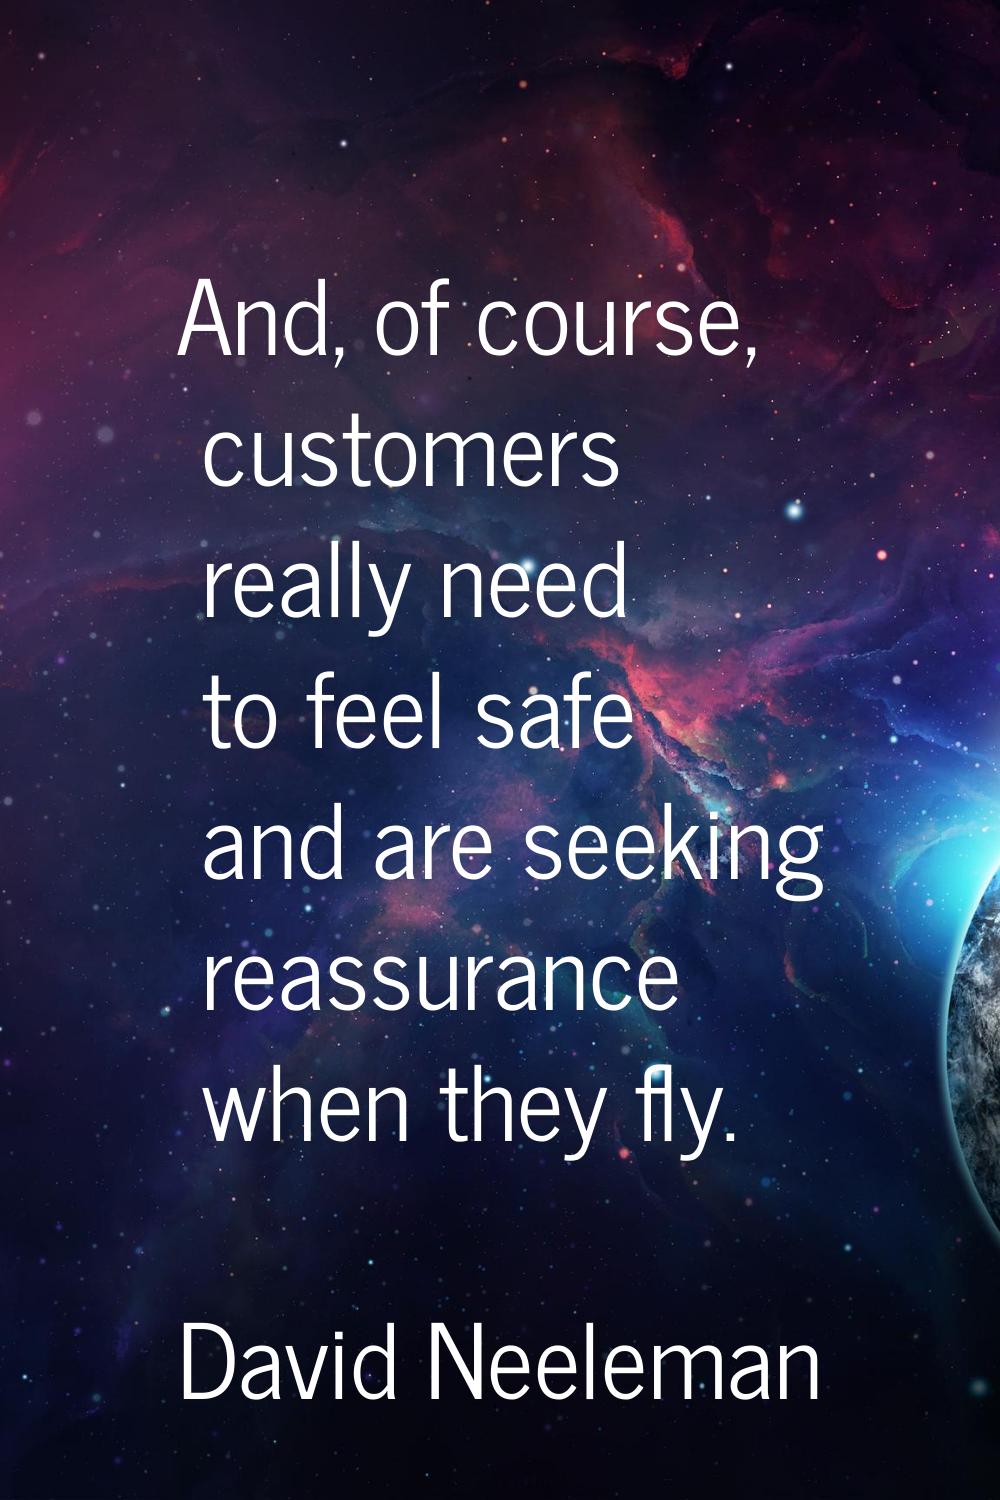 And, of course, customers really need to feel safe and are seeking reassurance when they fly.